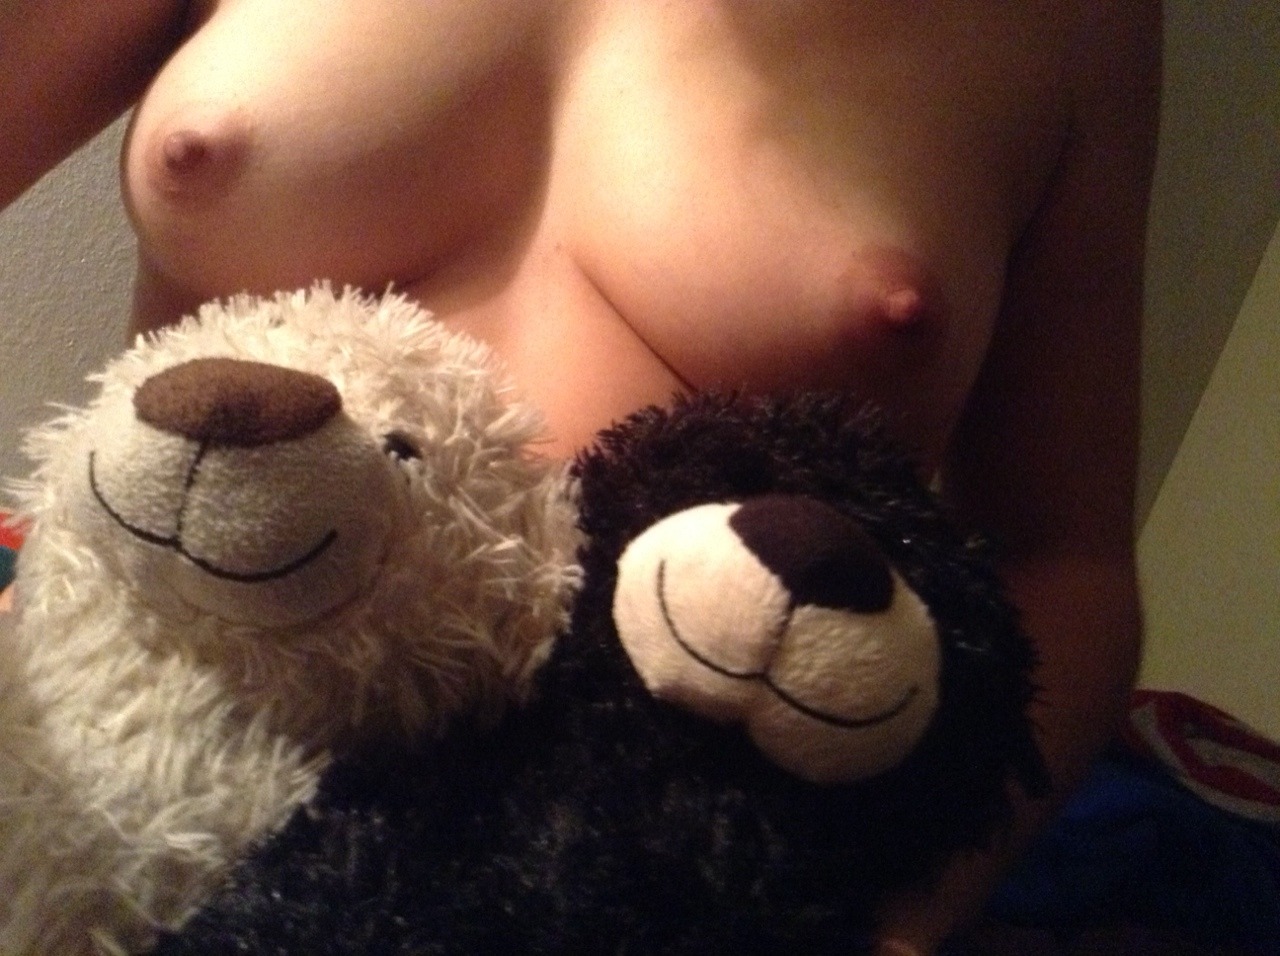 ud0ntn0m3:  Me and my stuffies, Boss and Phil ;-)  Boss and phil are lucky